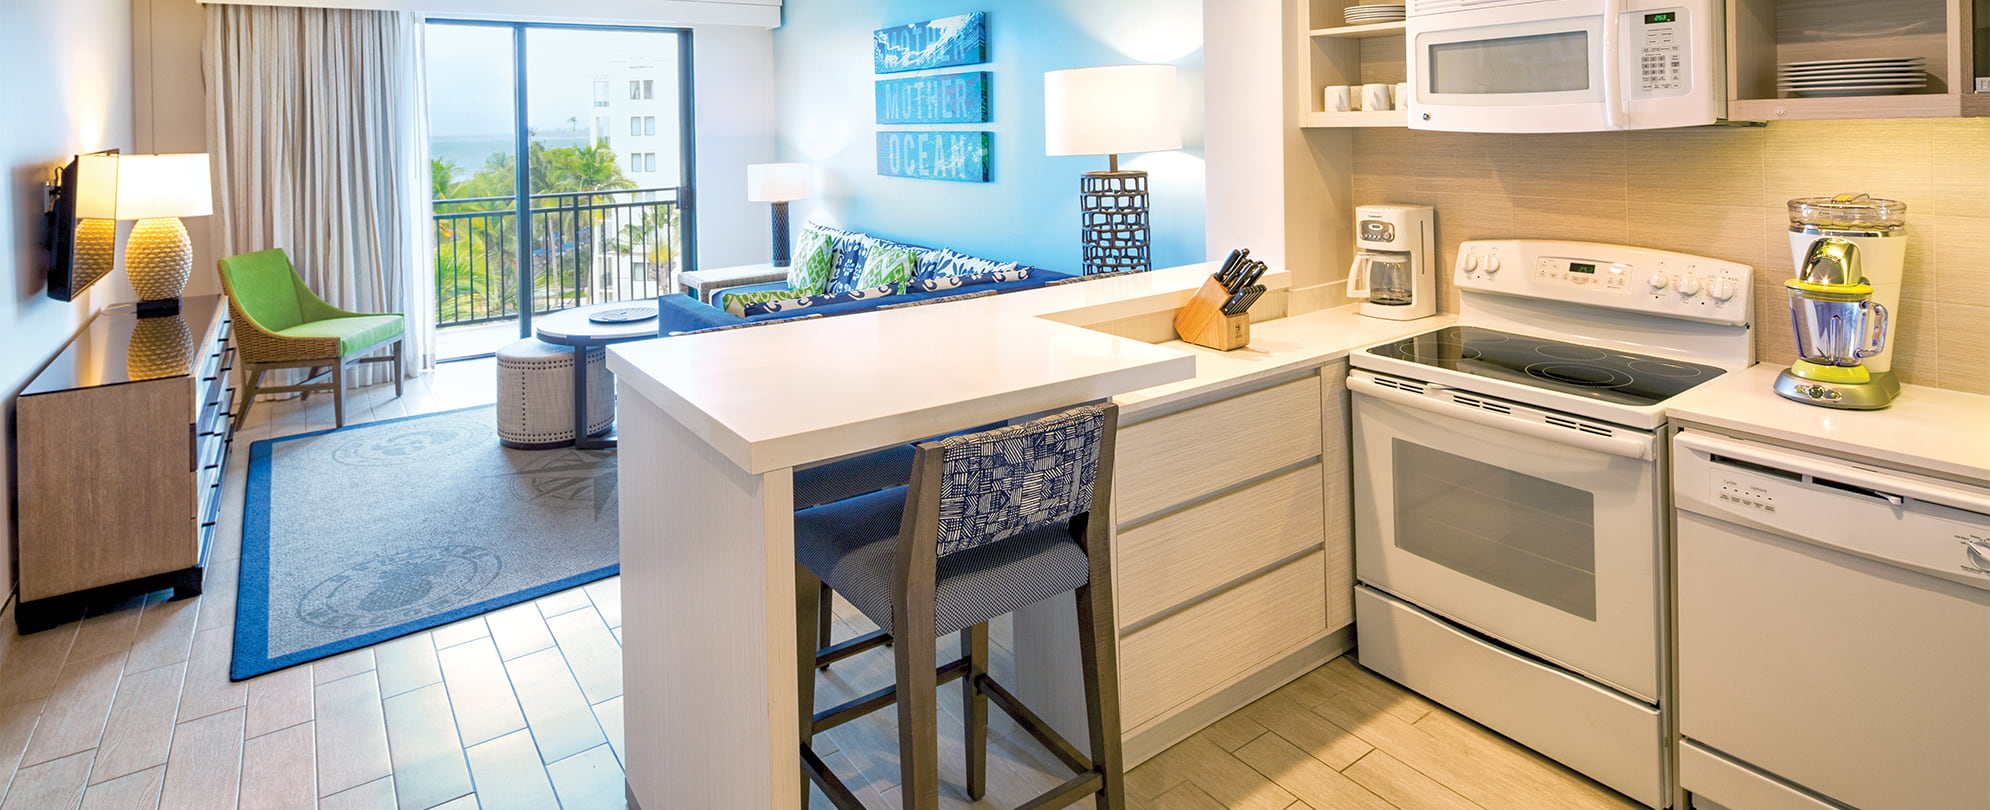 Kitchen and living room in a suite that overlooks the ocean at Margaritaville Vacation Club by Wyndham - Rio Mar.